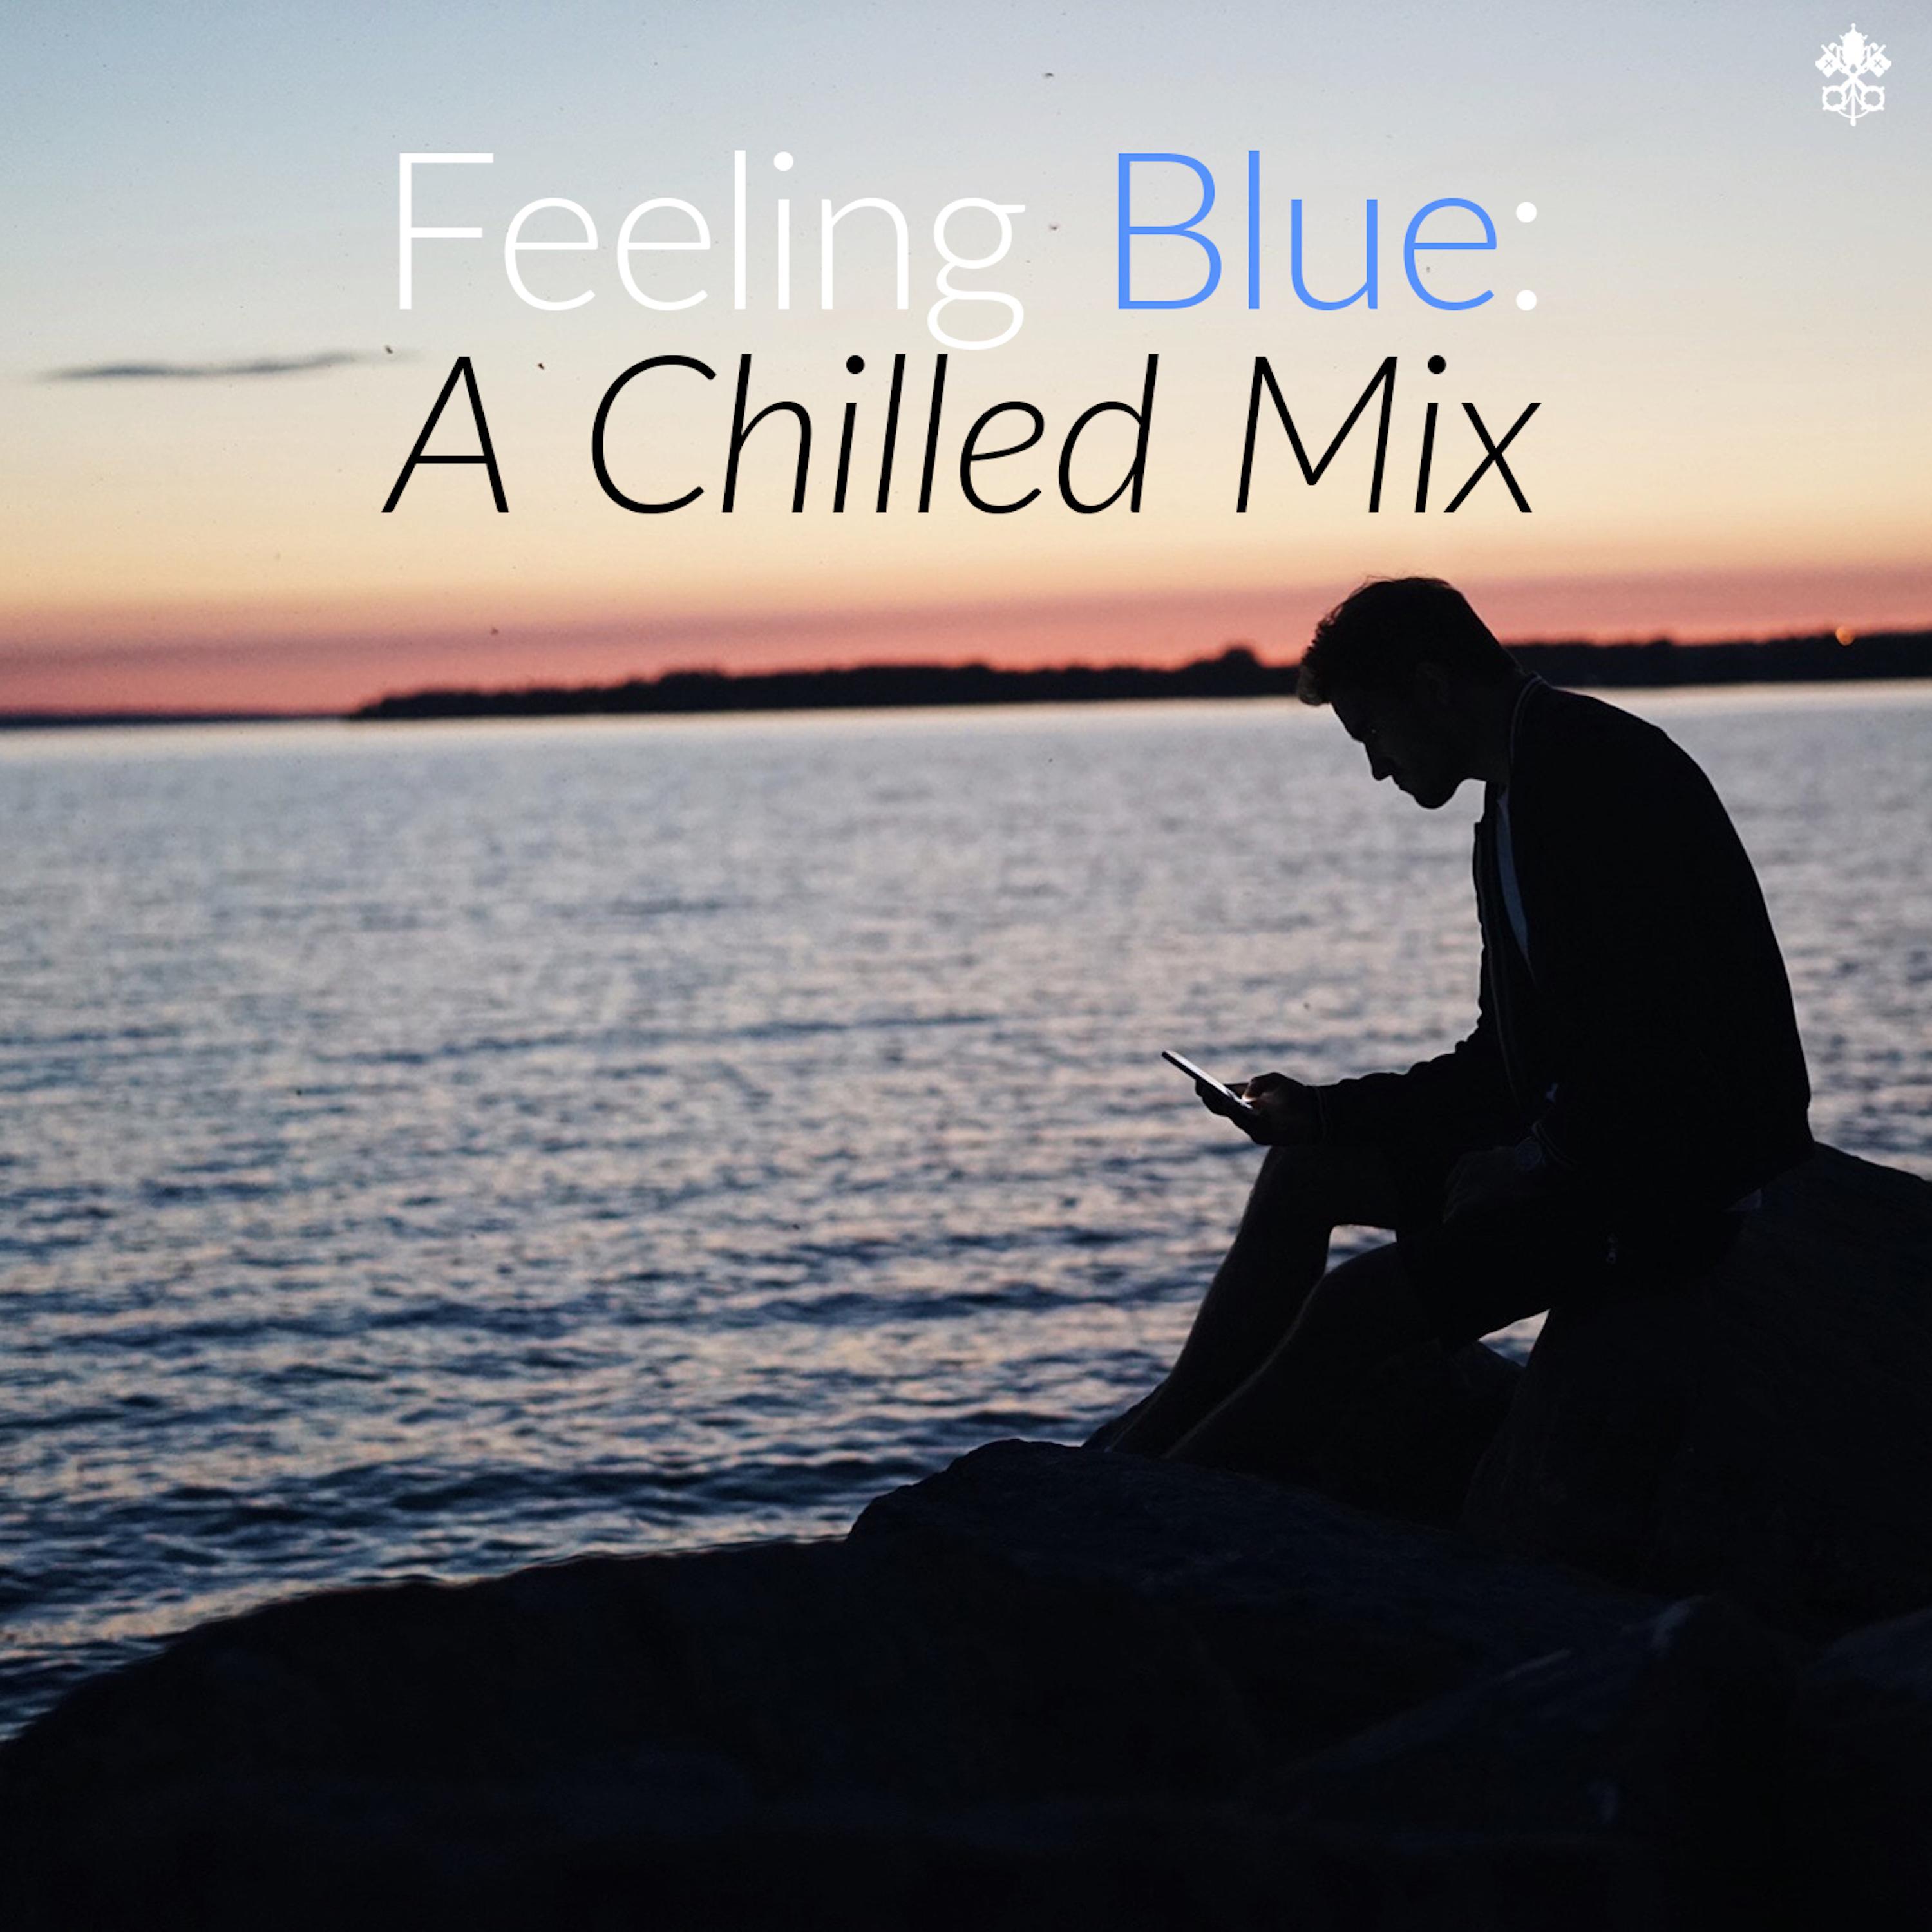 Feeling Blue: A Chilled Mix